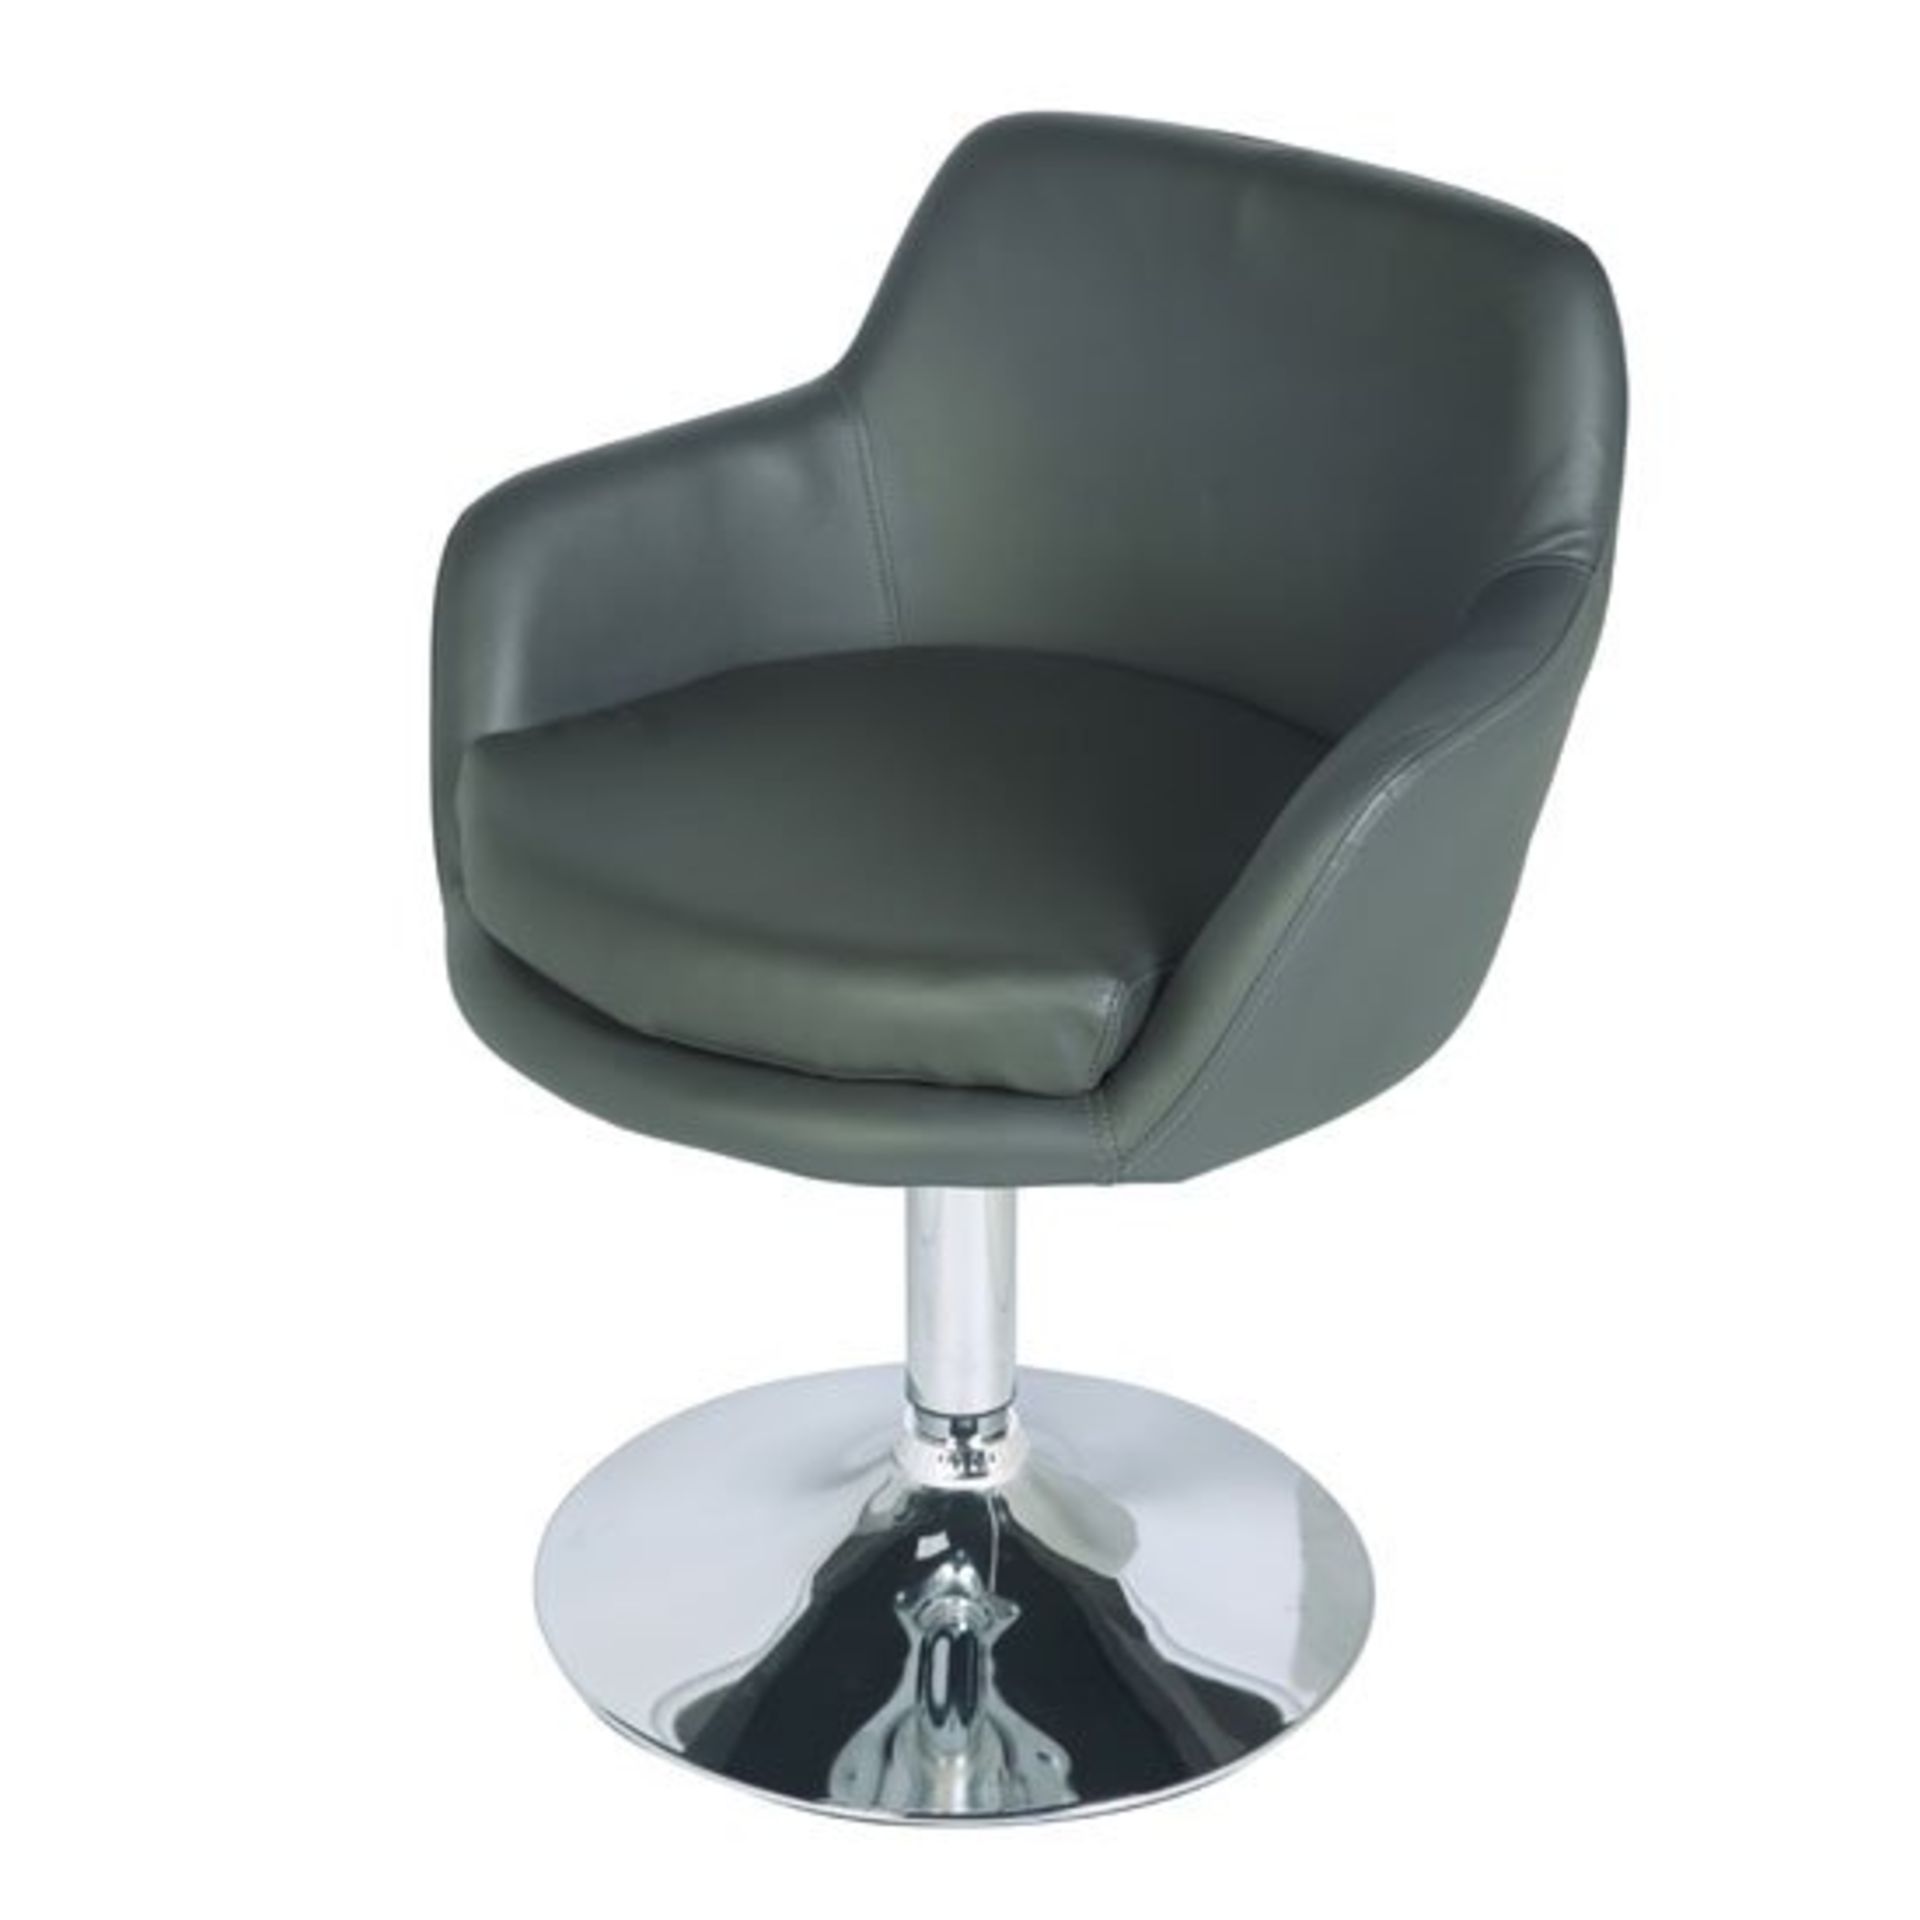 Boxed Bucketeer Bar Chair In Grey Charcoal RRP £145